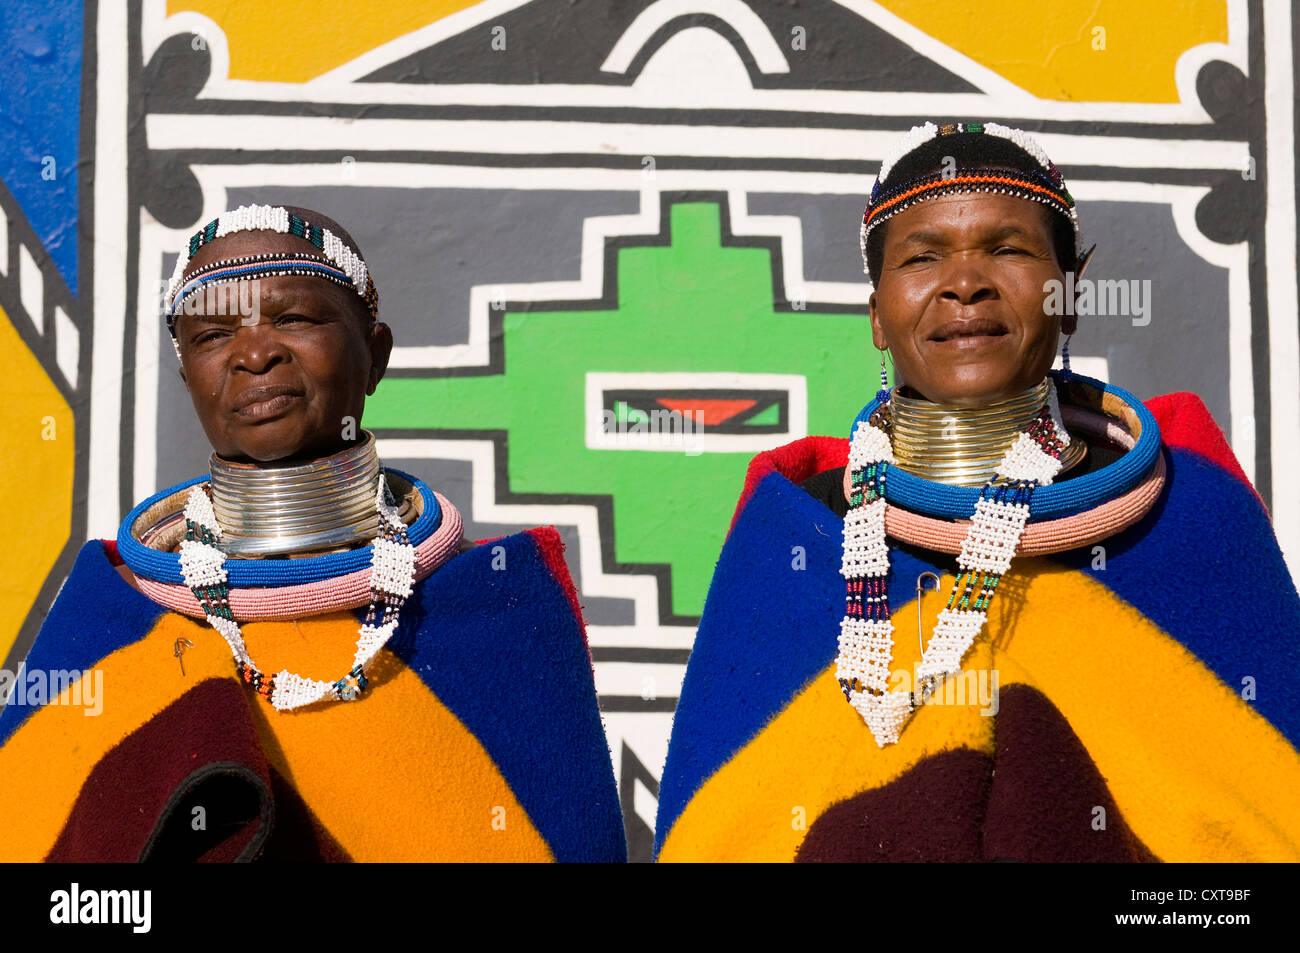 Ndebele women wearing traditional dress, Botshabele Mission Station, Limpopo, South Africa, Africa Stock Photo